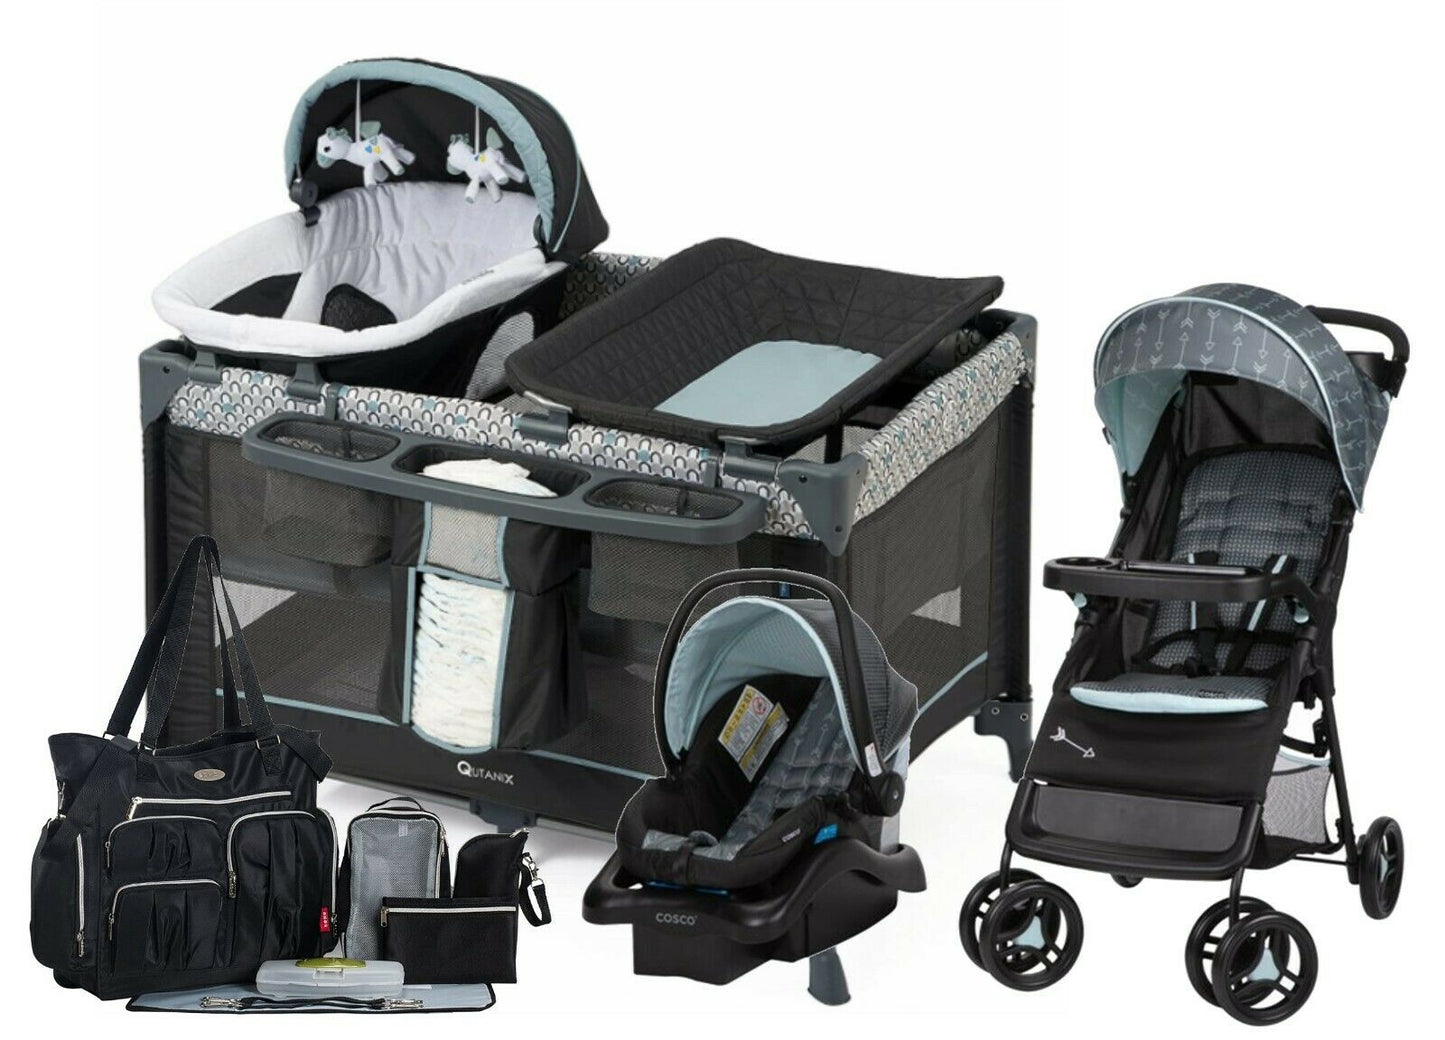 Baby Stroller Car Seat Travel System with Infant Playard Diaper Bag Combo